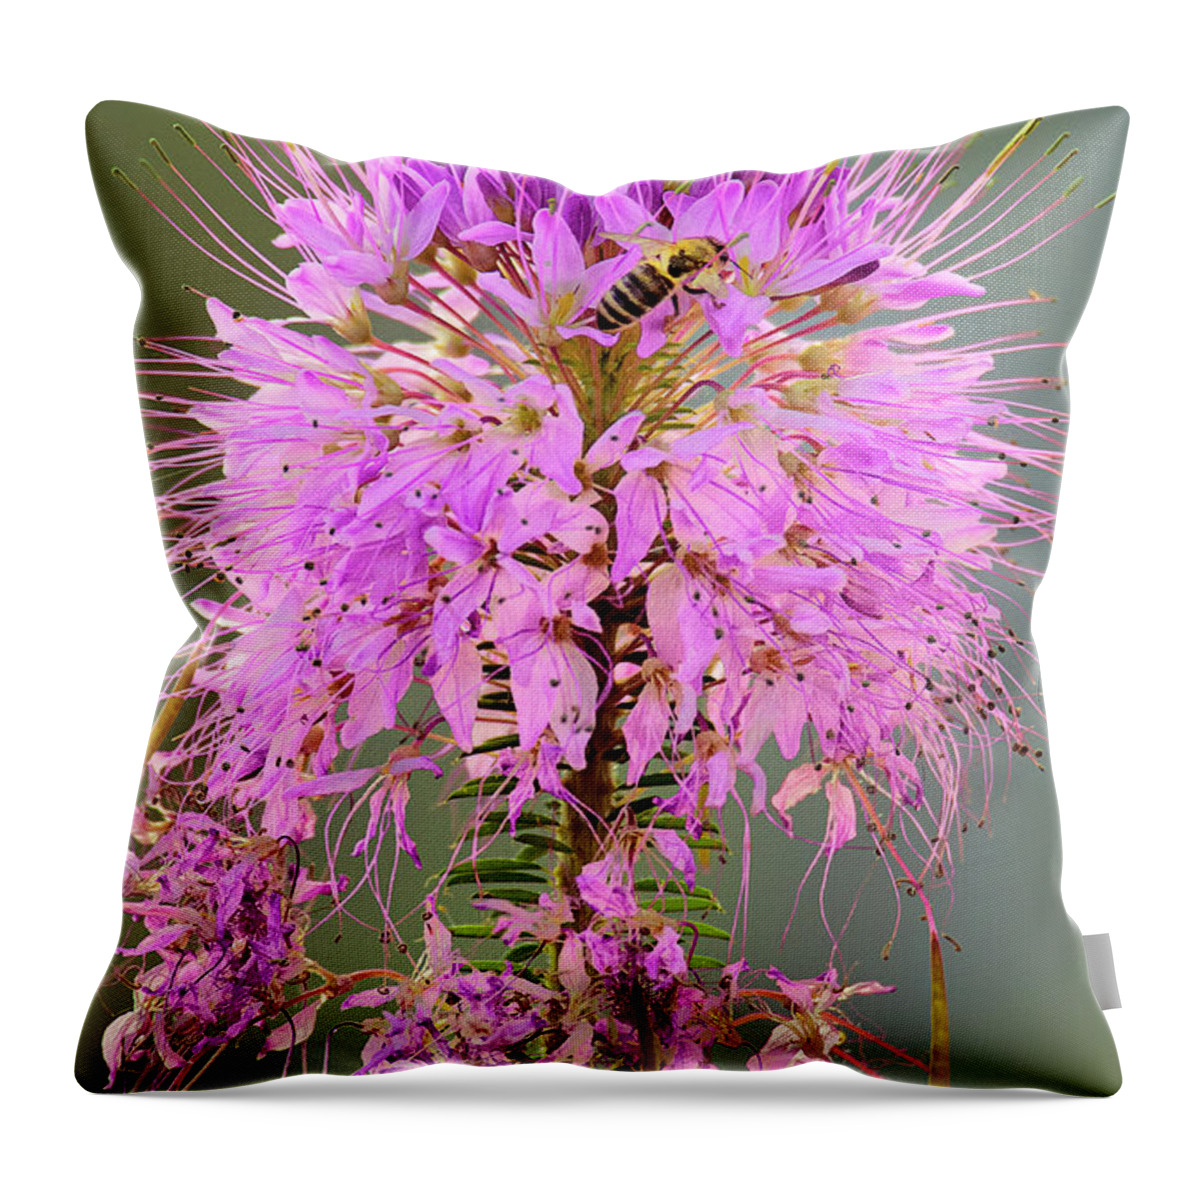 Dave Welling Throw Pillow featuring the photograph Rocky Mountain Beeplant Cleome Serrulata And Honey Bee by Dave Welling